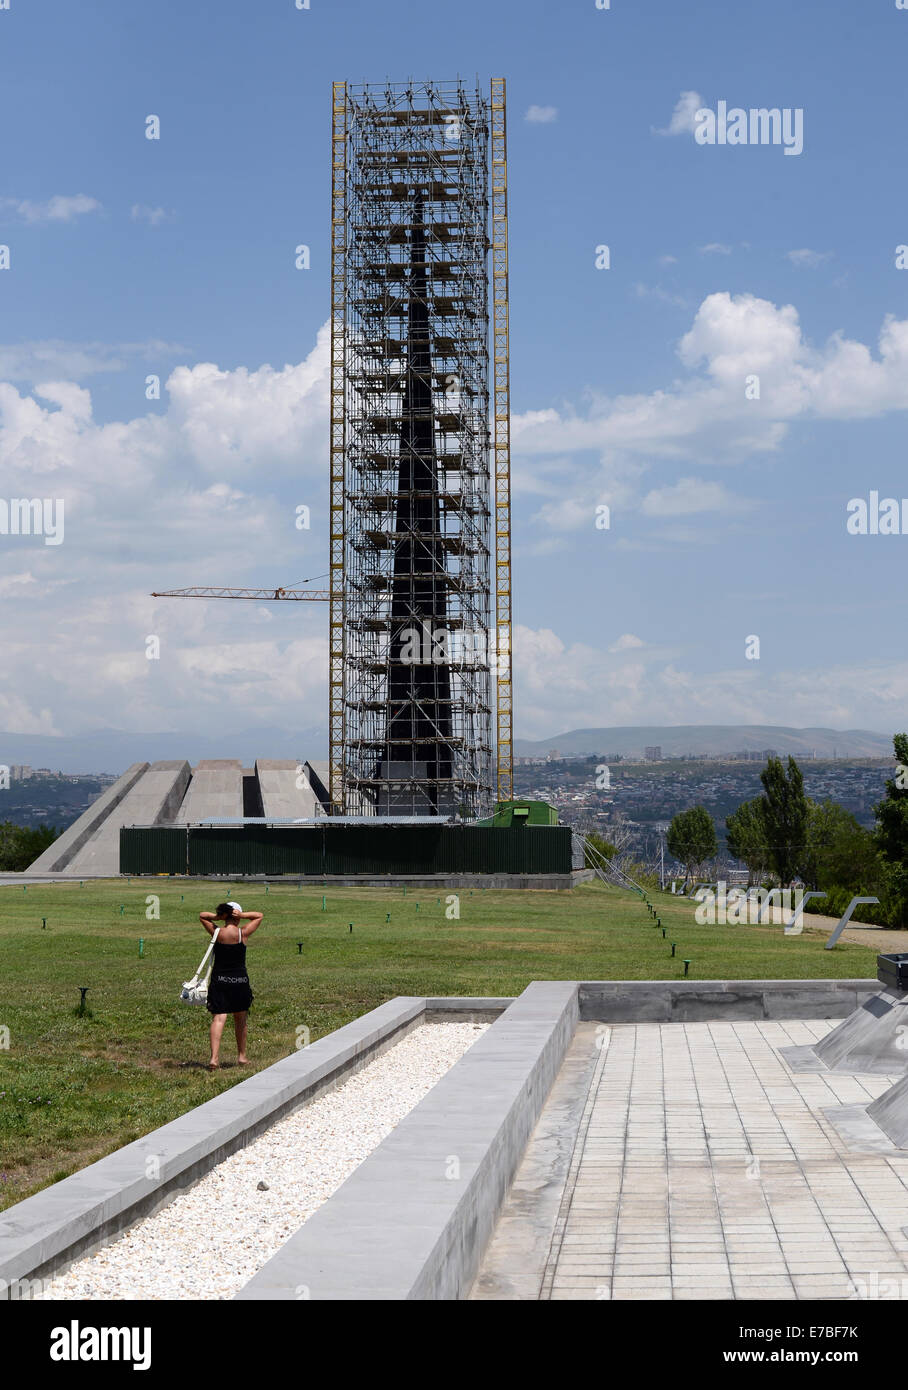 The Armenian Genocide memorial complex on the hill of Tsitsernakaberd in the Armenian capital Yerevan on 28 June 2014. Renovation works are currently underway to prepare the memorial for the centenary of the genocide in 2015. Armenian Genocide Remembrance Day is observed on April 24. Photo: Jens Kalaene -NO WIRE SERVICE- Stock Photo